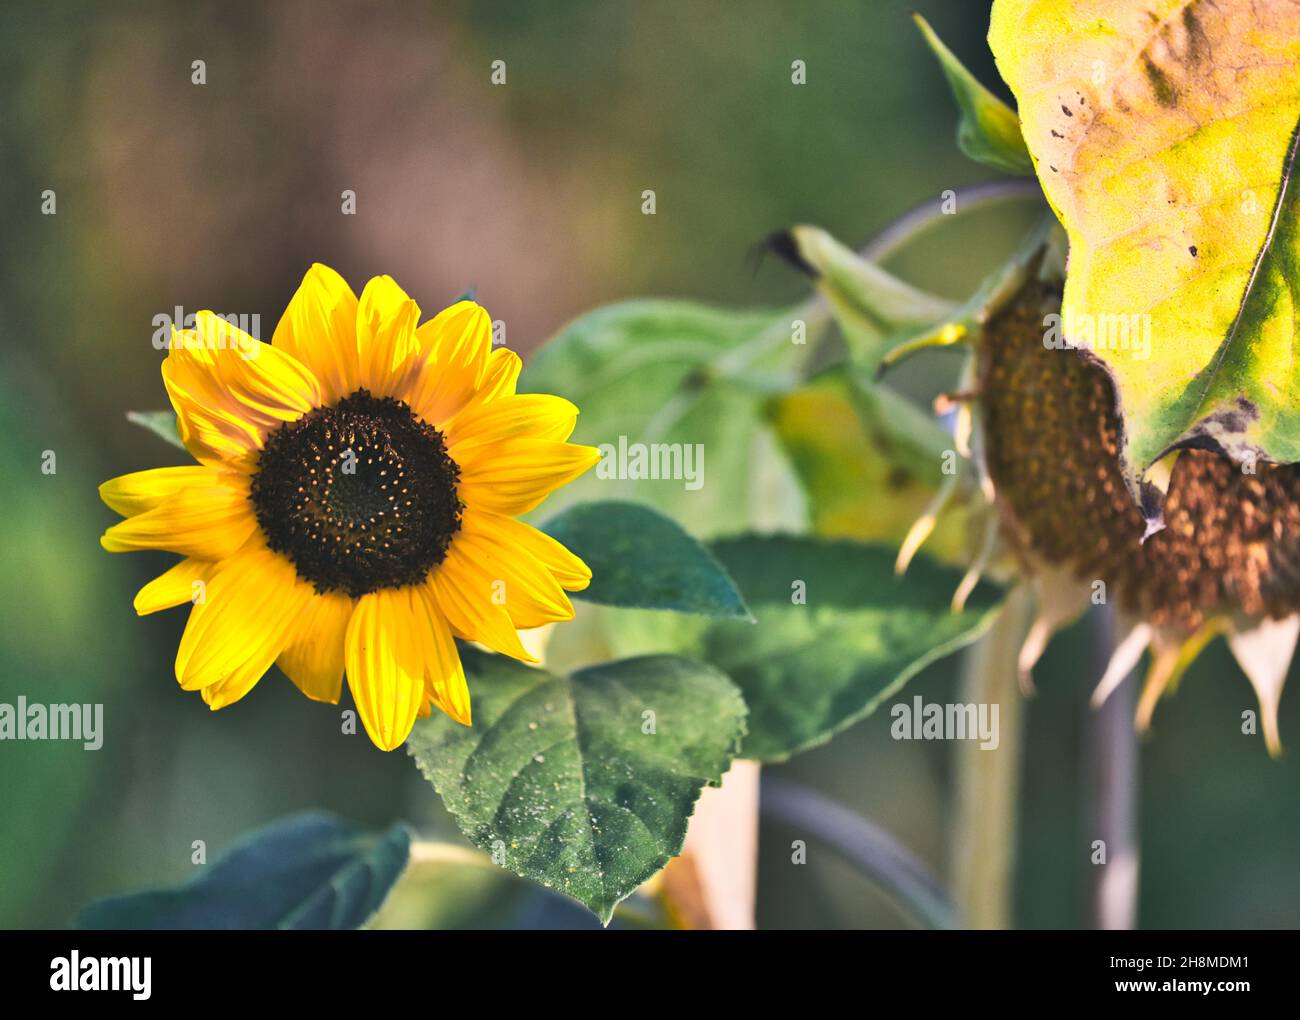 Two sunflowers (Helianthus Annuus) one vibrant in bloom and one wilting. Concept of opposites Stock Photo